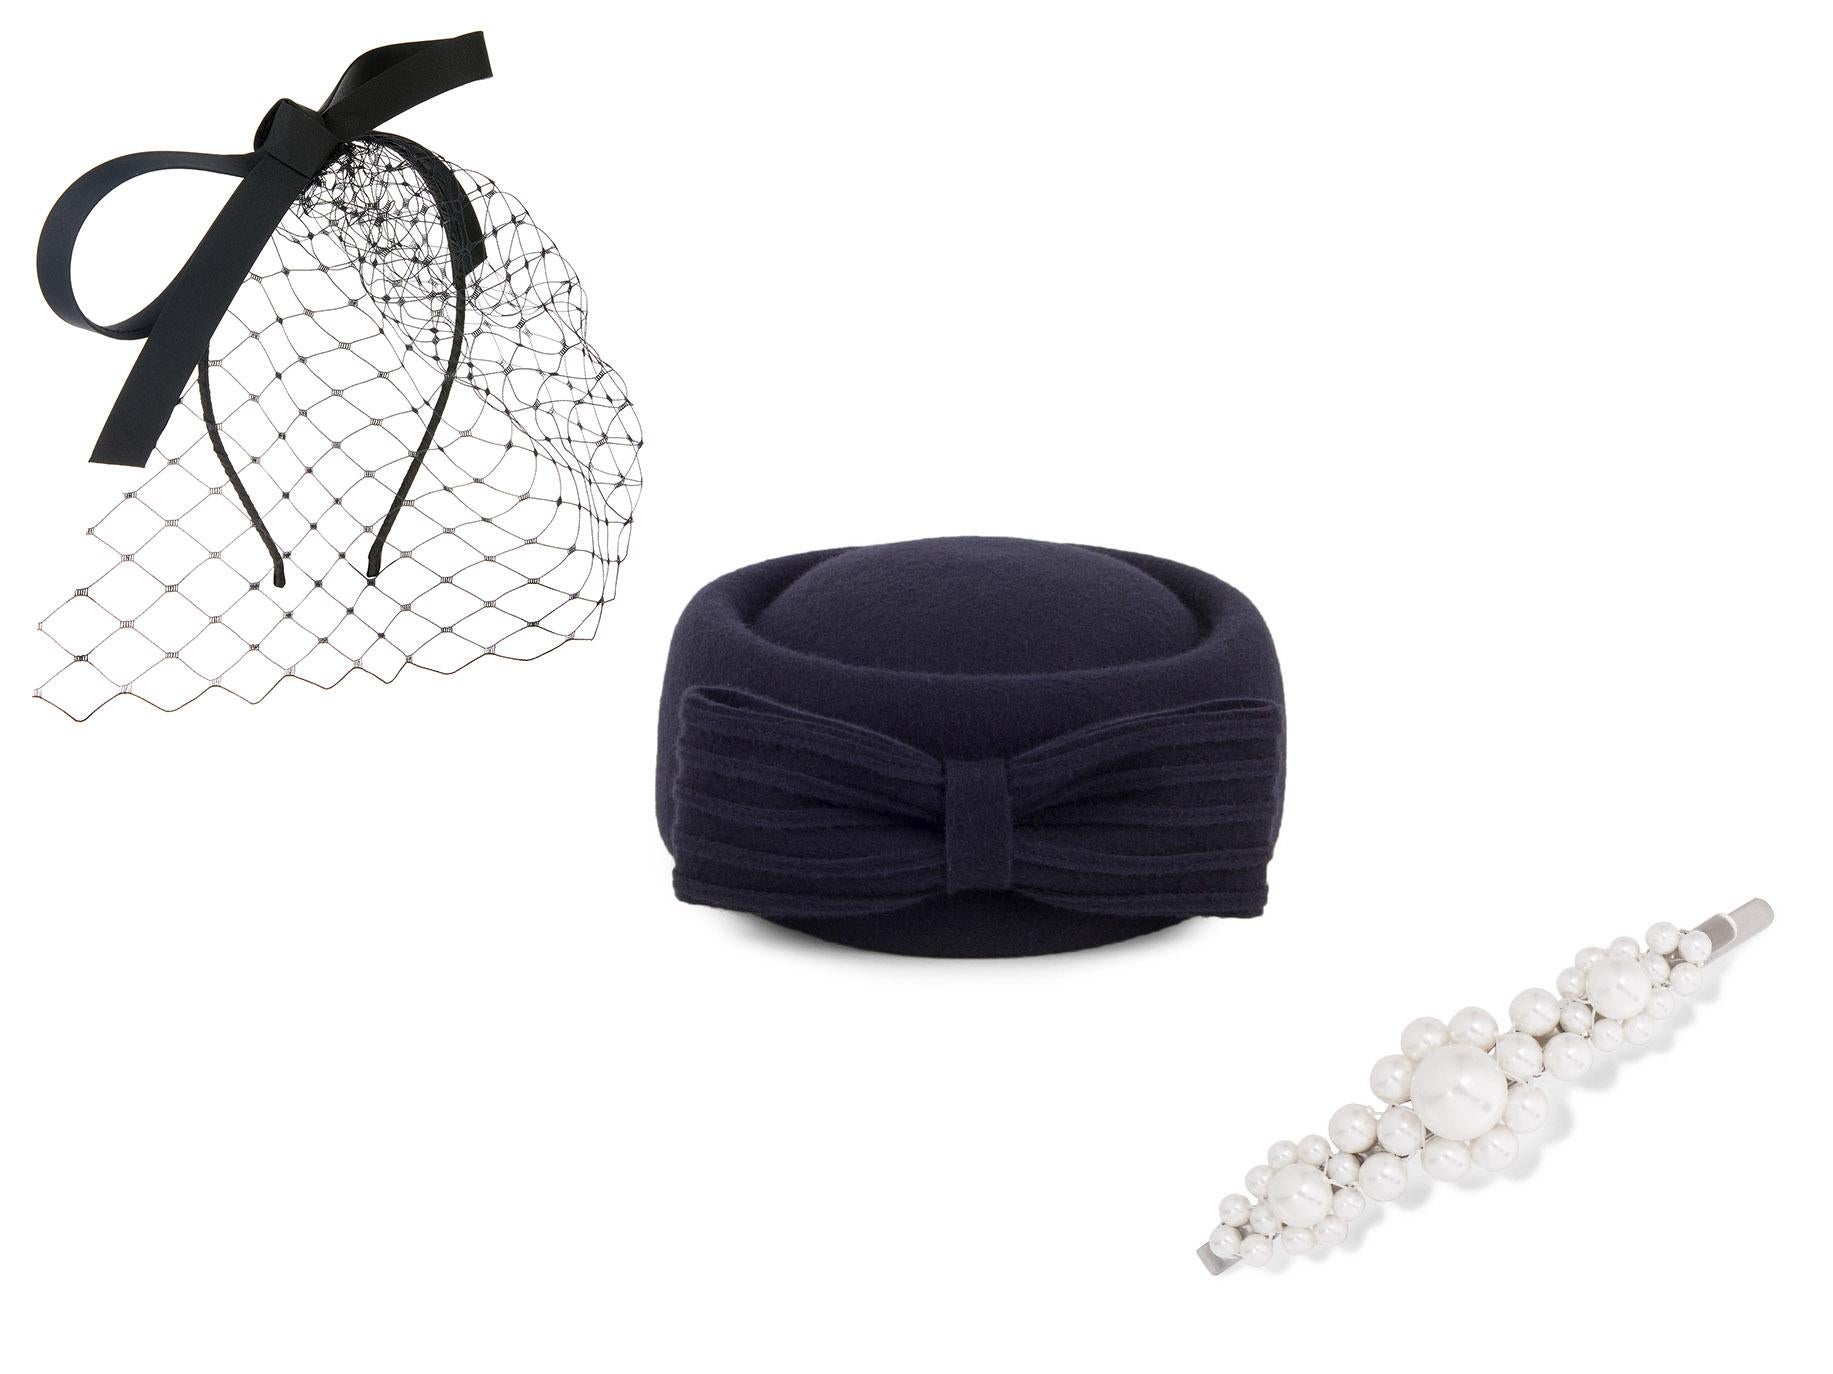 Bow and Veil Headpiece, £25, Accessorize; Whiteley Hats Jackie O Loop Bow Pillbox Hat, £77.95, Hats and Caps; Simone Rocha, Silver-Tone Faux Pearl Hair Slide, £75, Net-a-Porter